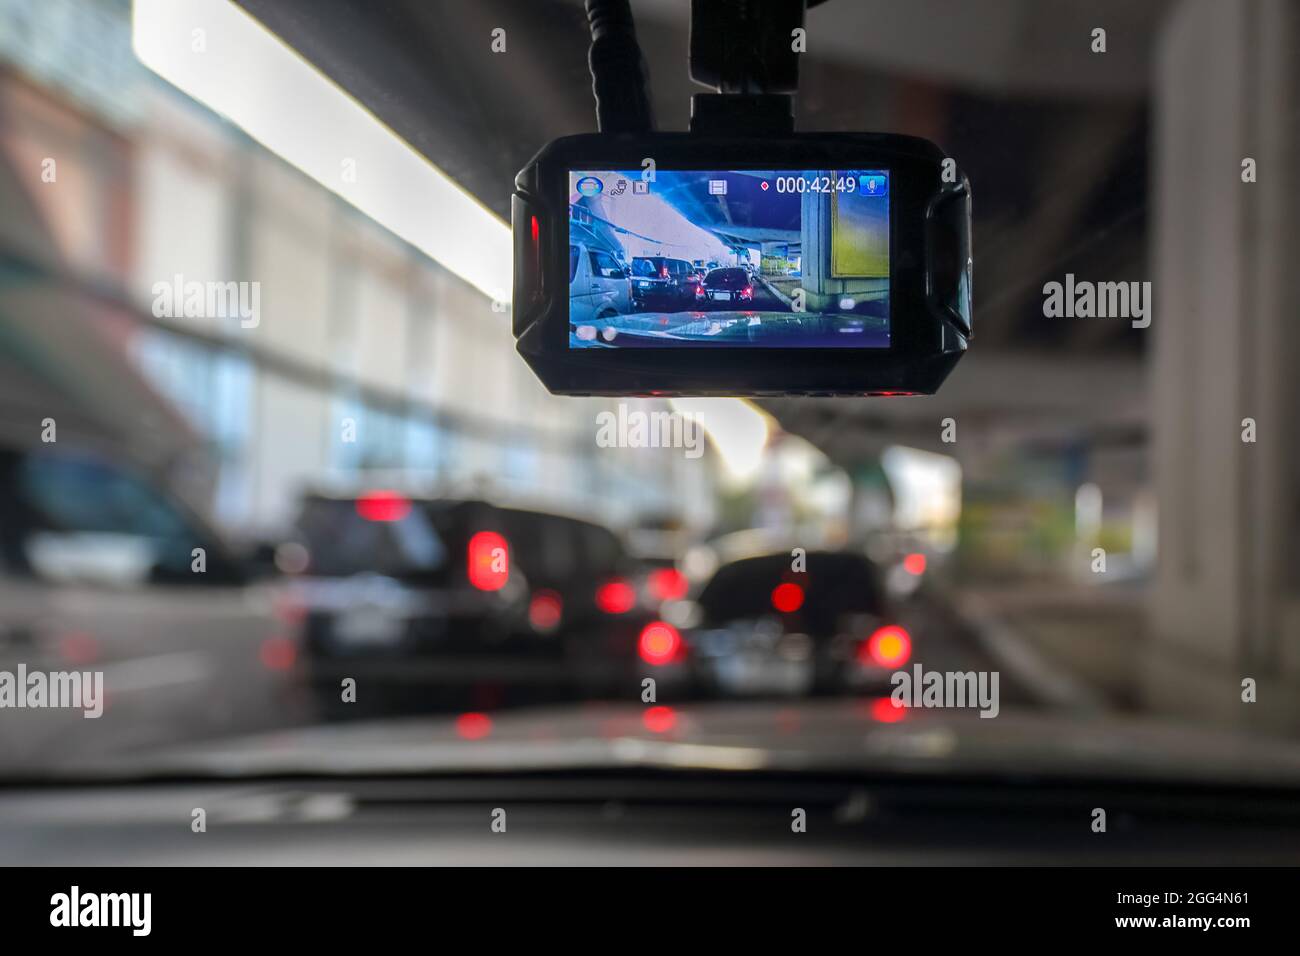 https://c8.alamy.com/comp/2GG4N61/dash-camera-or-car-video-recorder-in-vehicle-on-the-way-2GG4N61.jpg